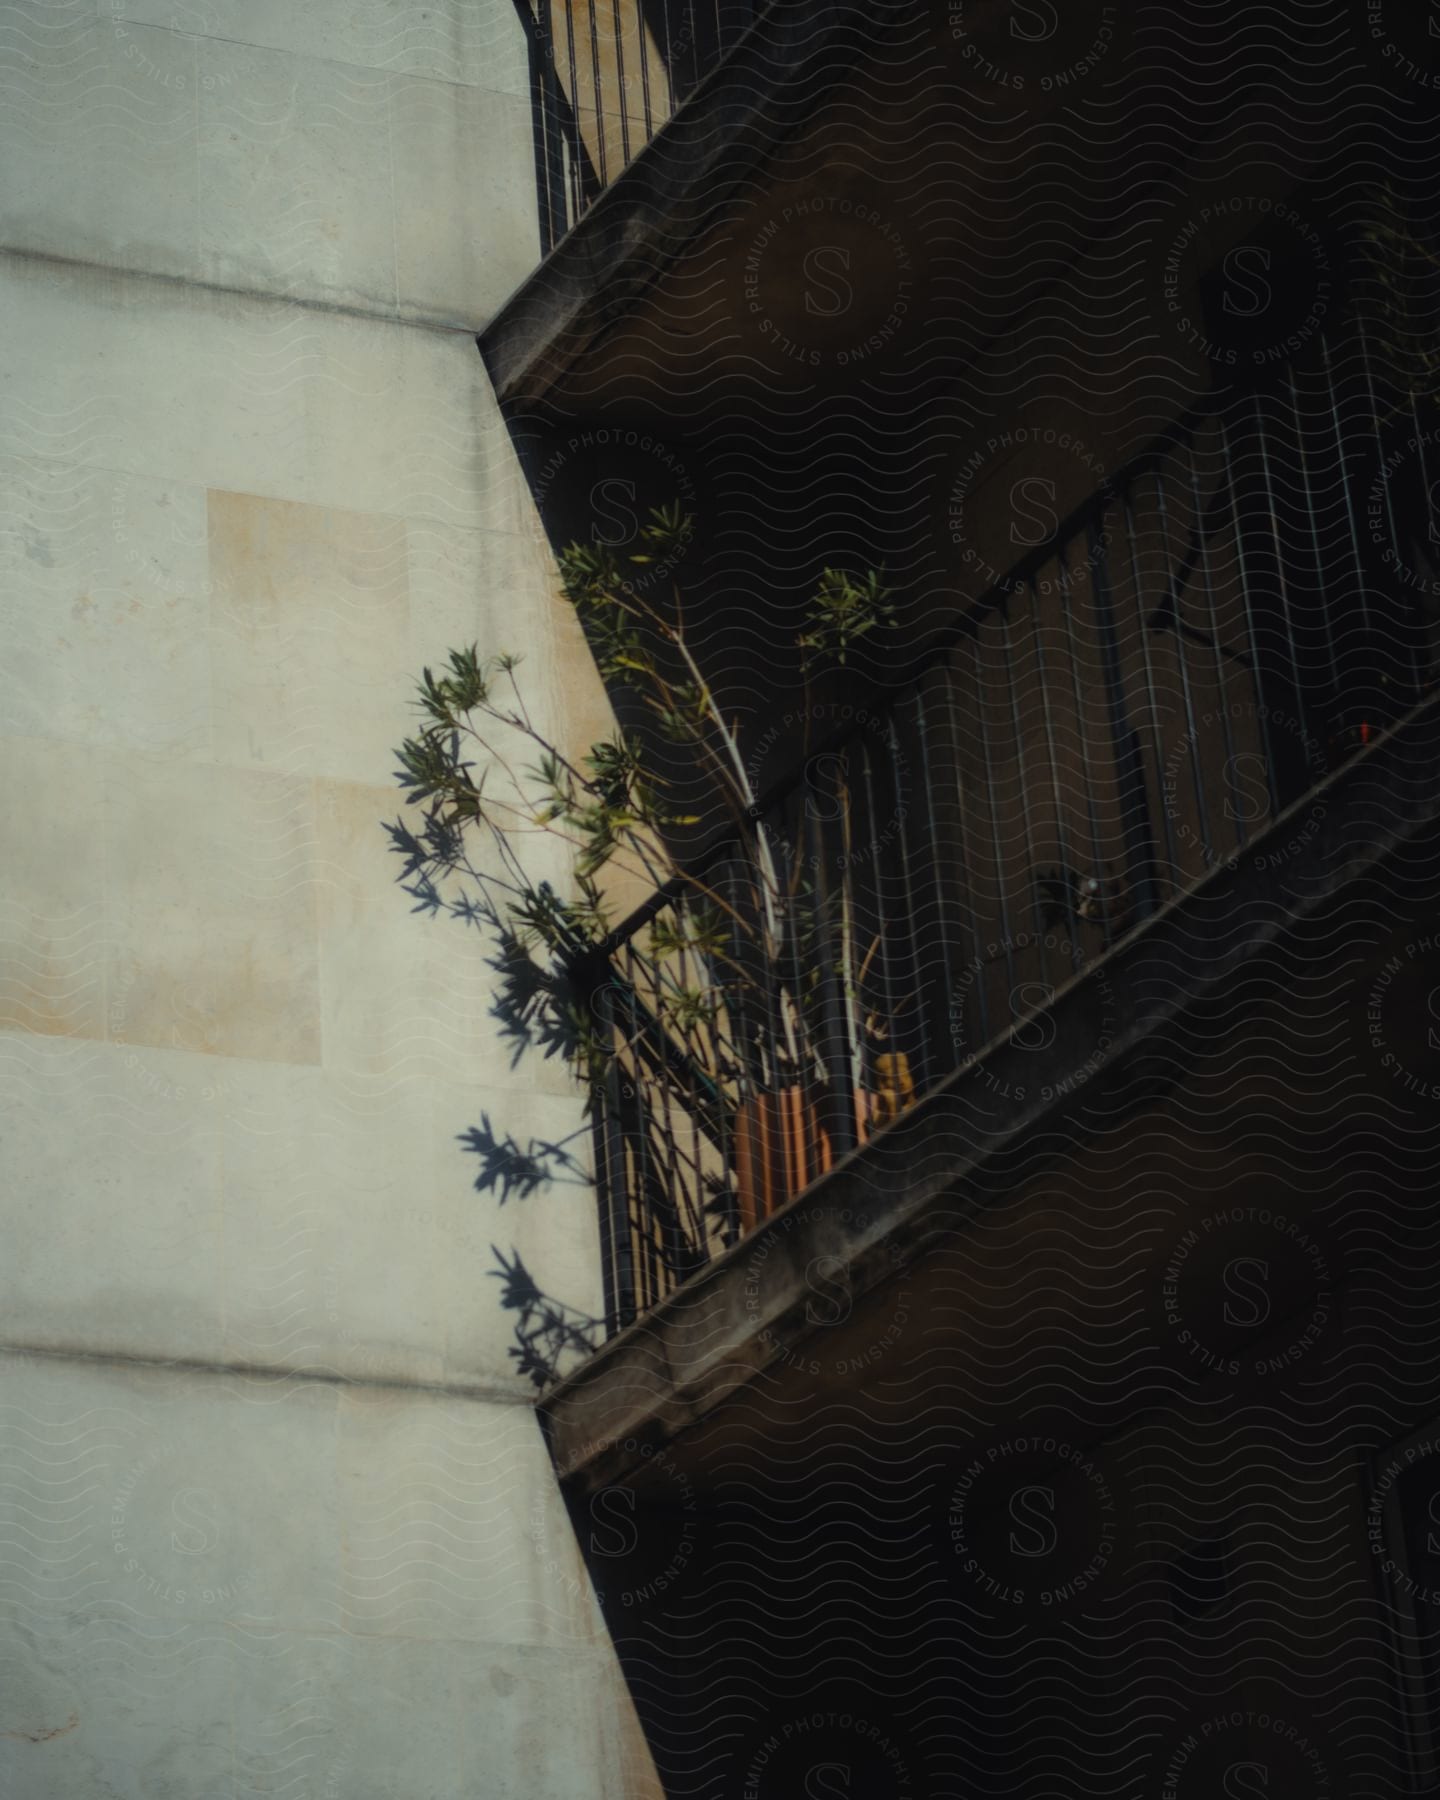 A potted plant sits on a balcony outside a building